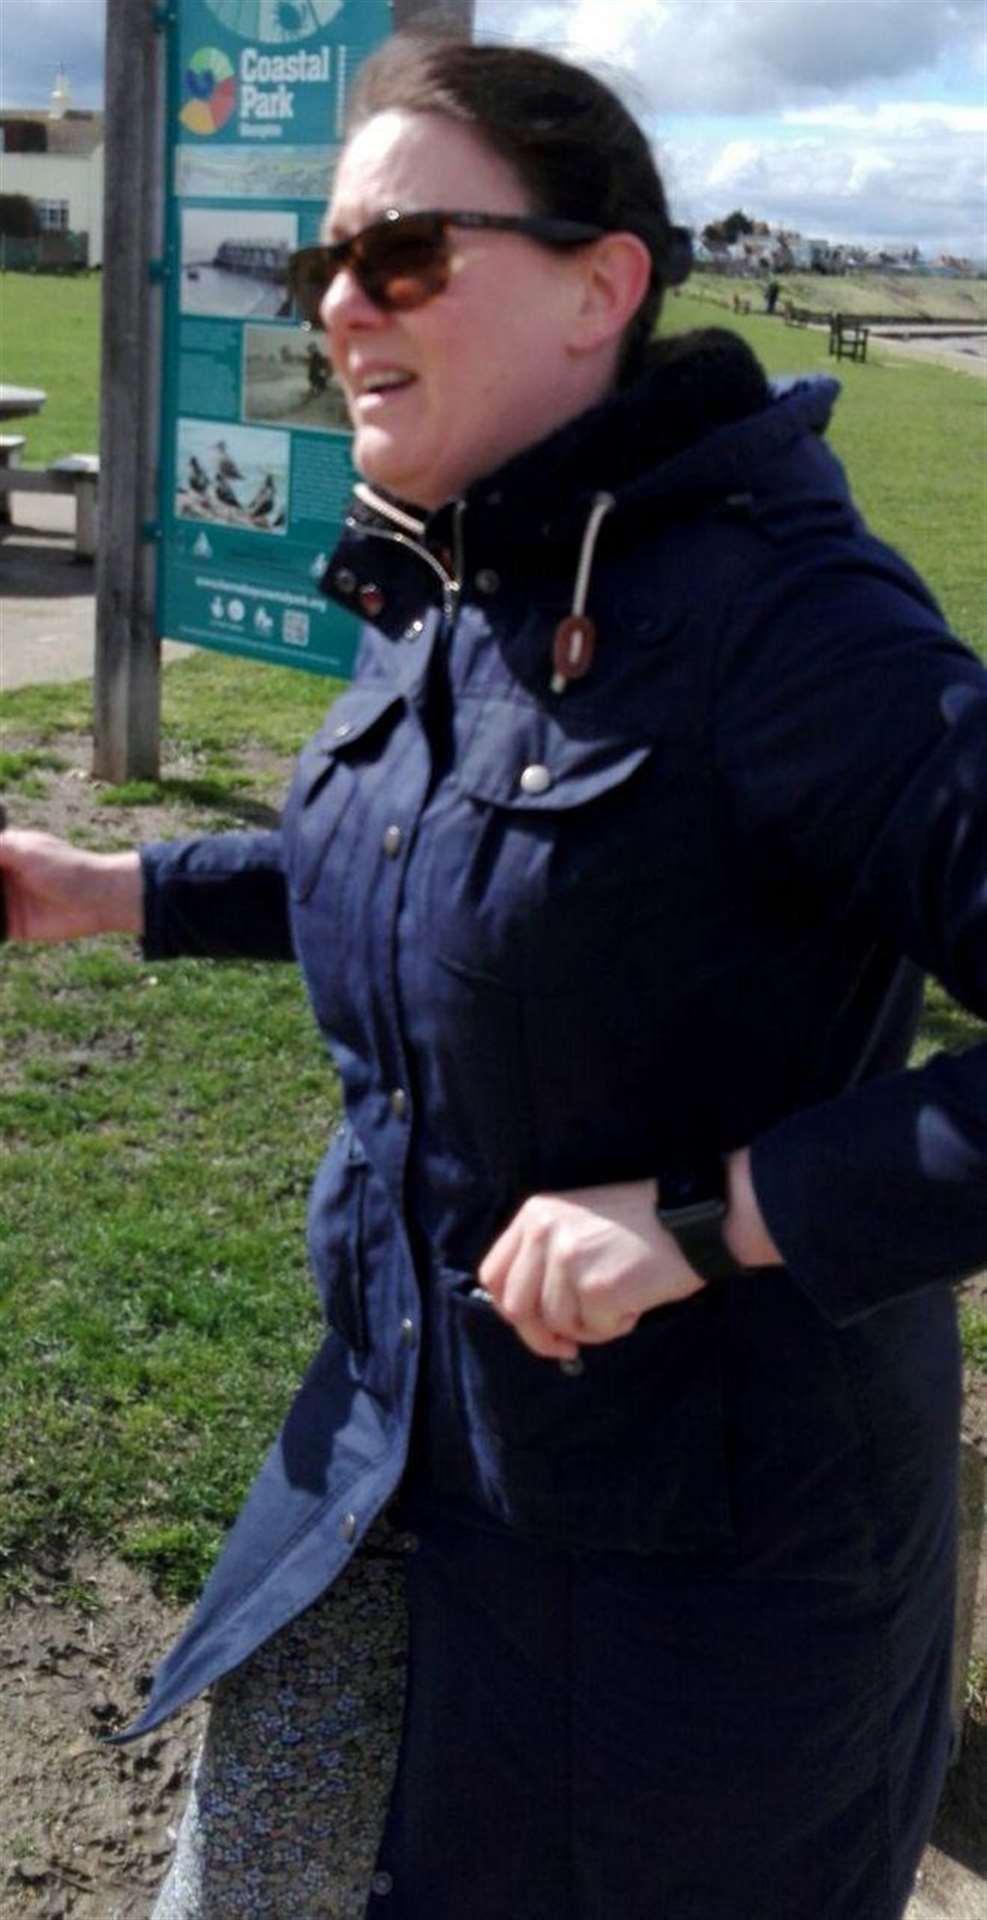 Officers want to speak to the woman pictured about the incident (1388663)